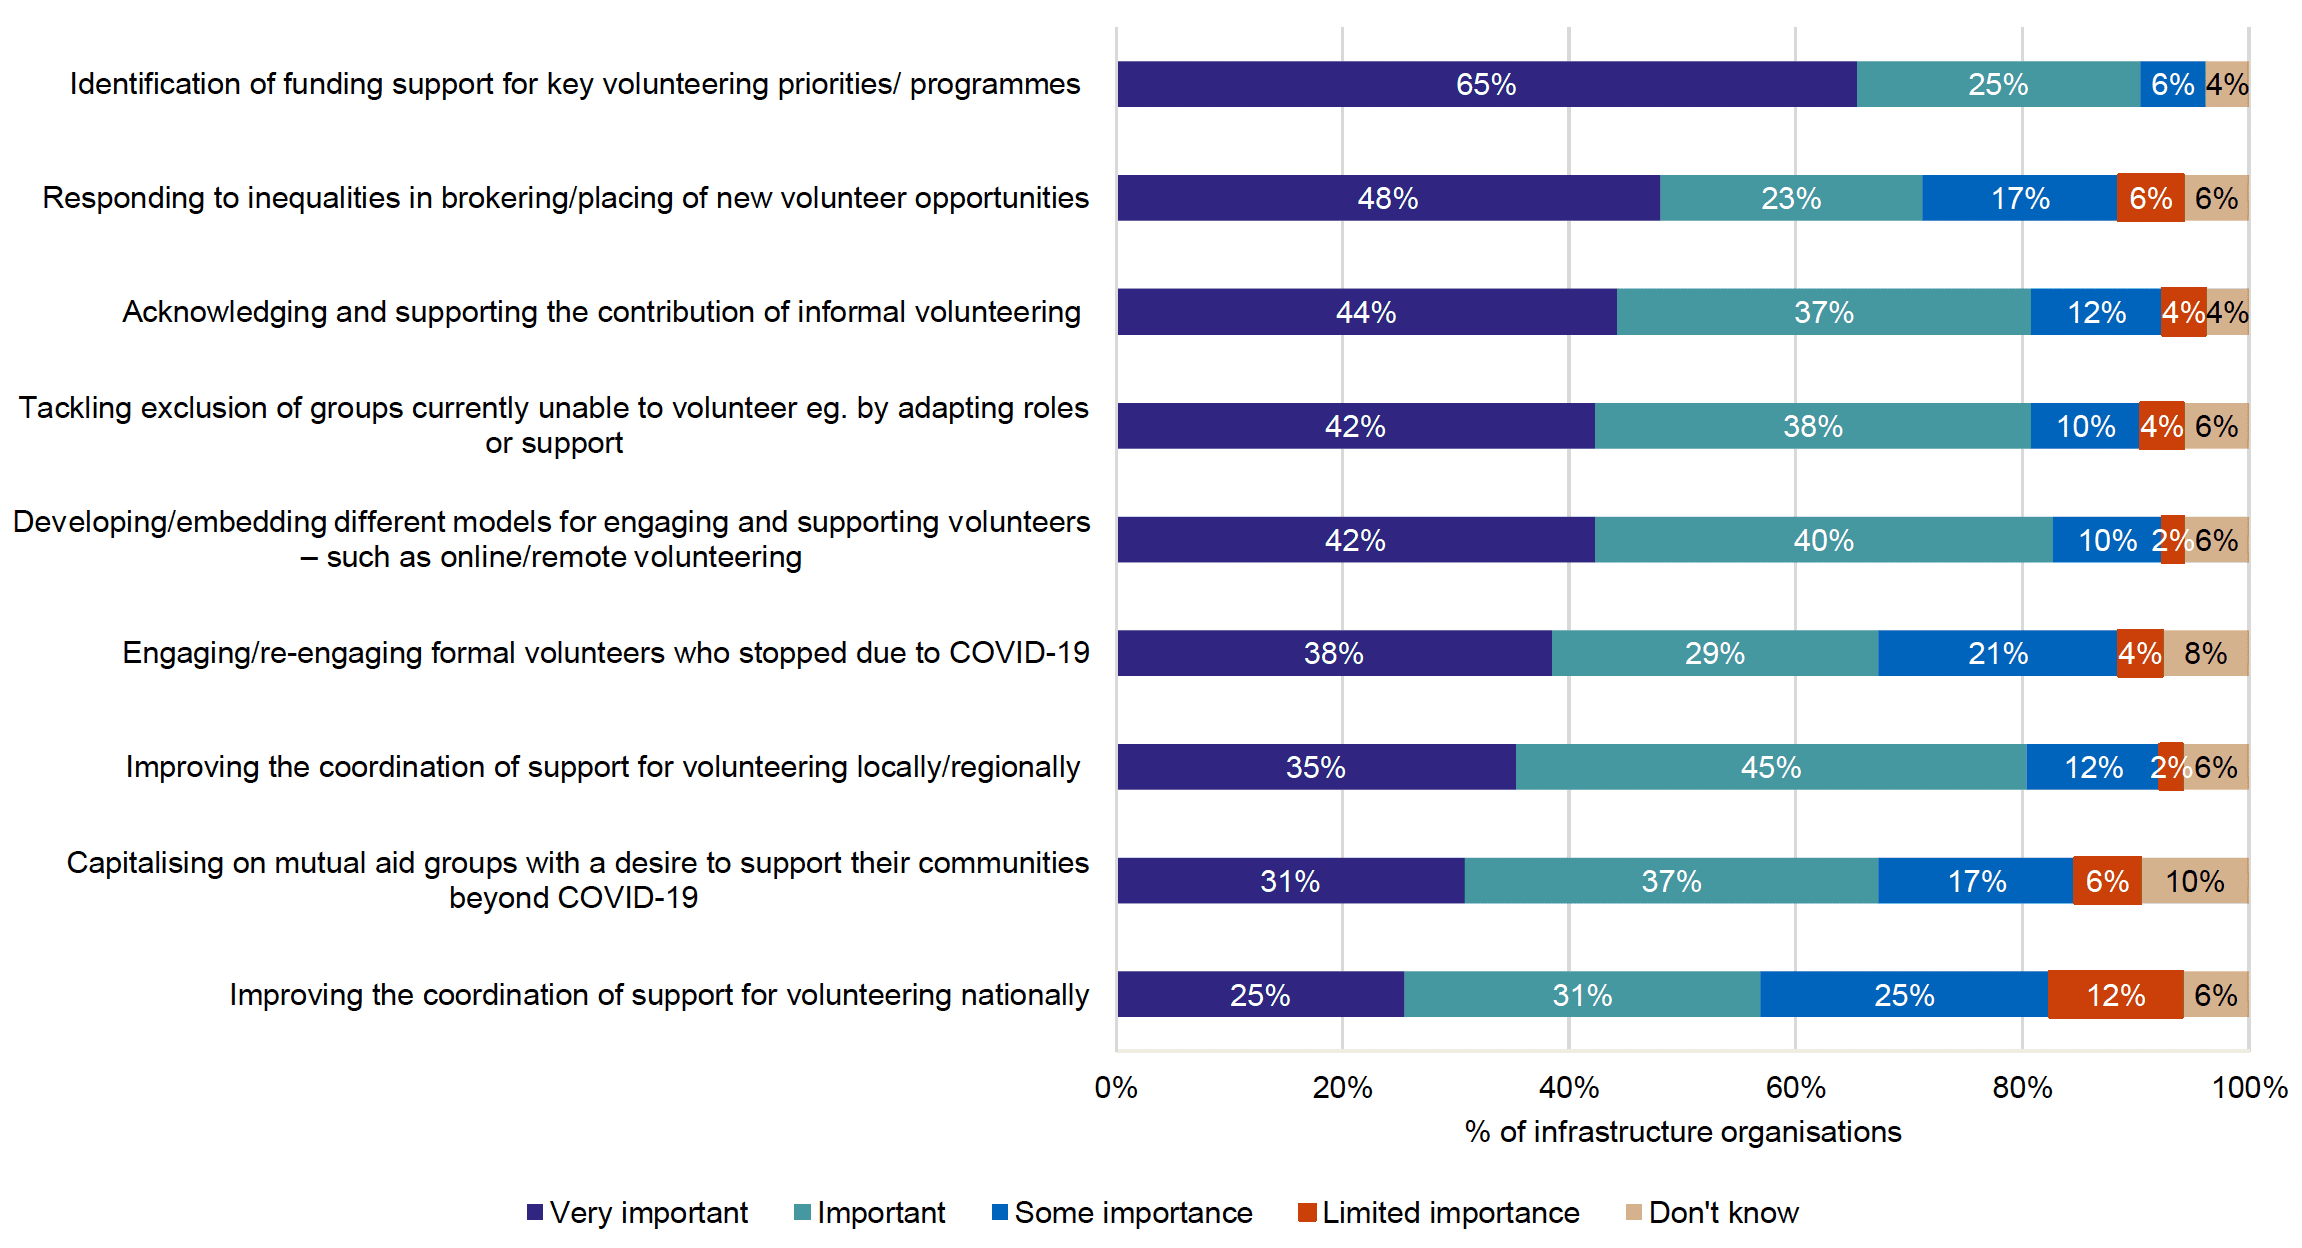 Chart showing infrastructure organisation views on the importance of different measures for supporting recovery in volunteering over the next 12 months